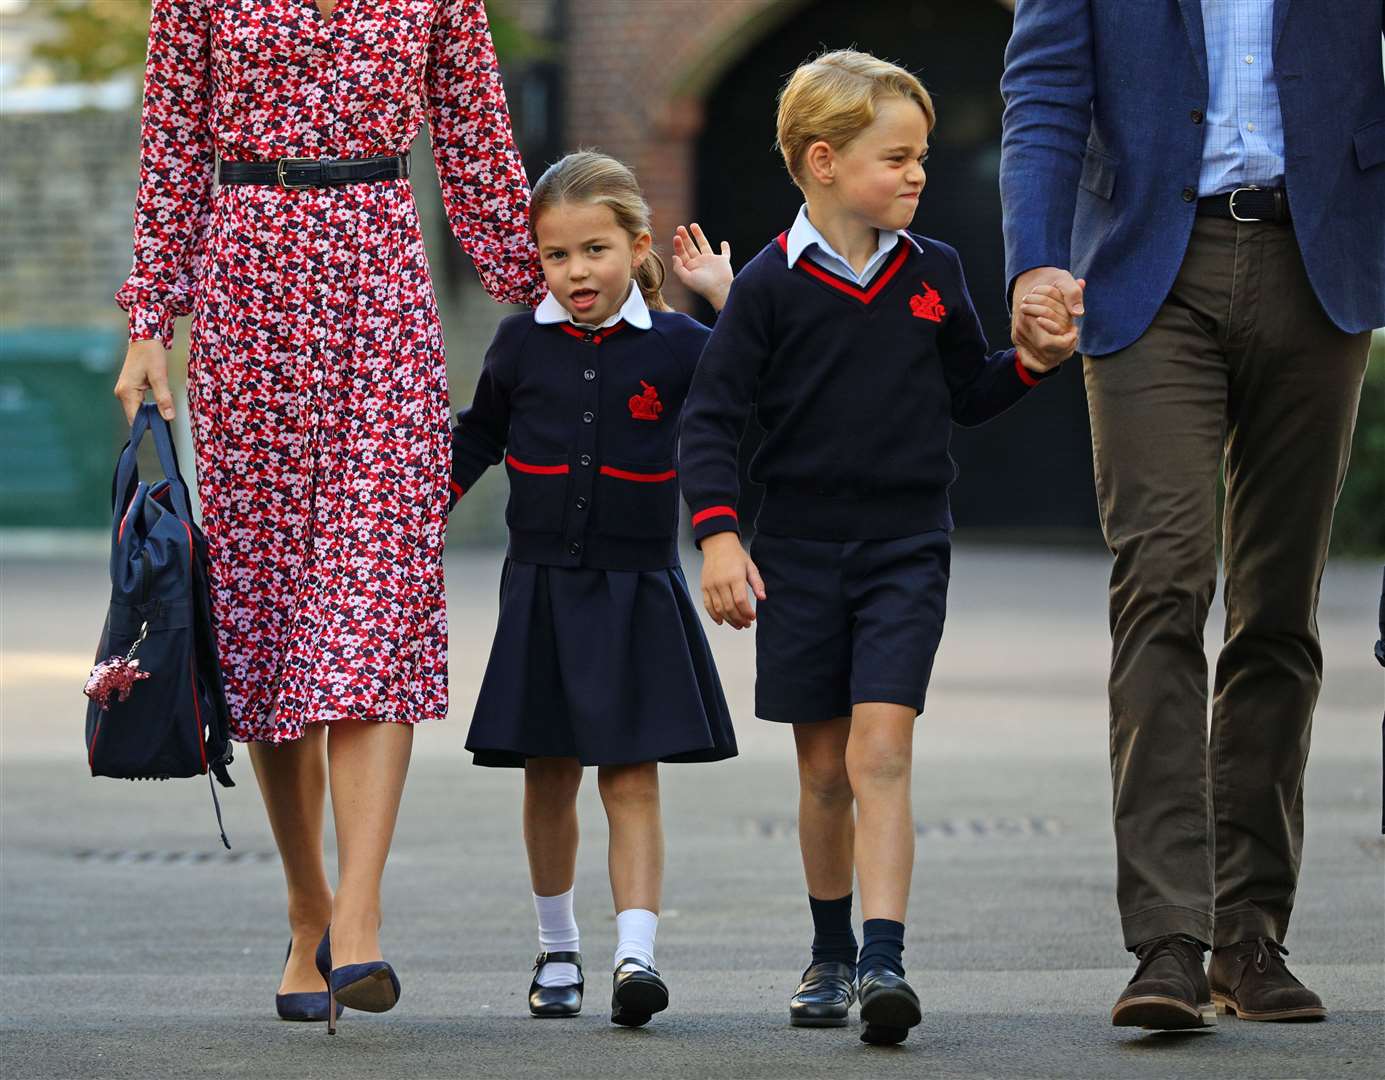 Charlotte’s first day at Thomas’s Battersea (Aaron Chown/PA)